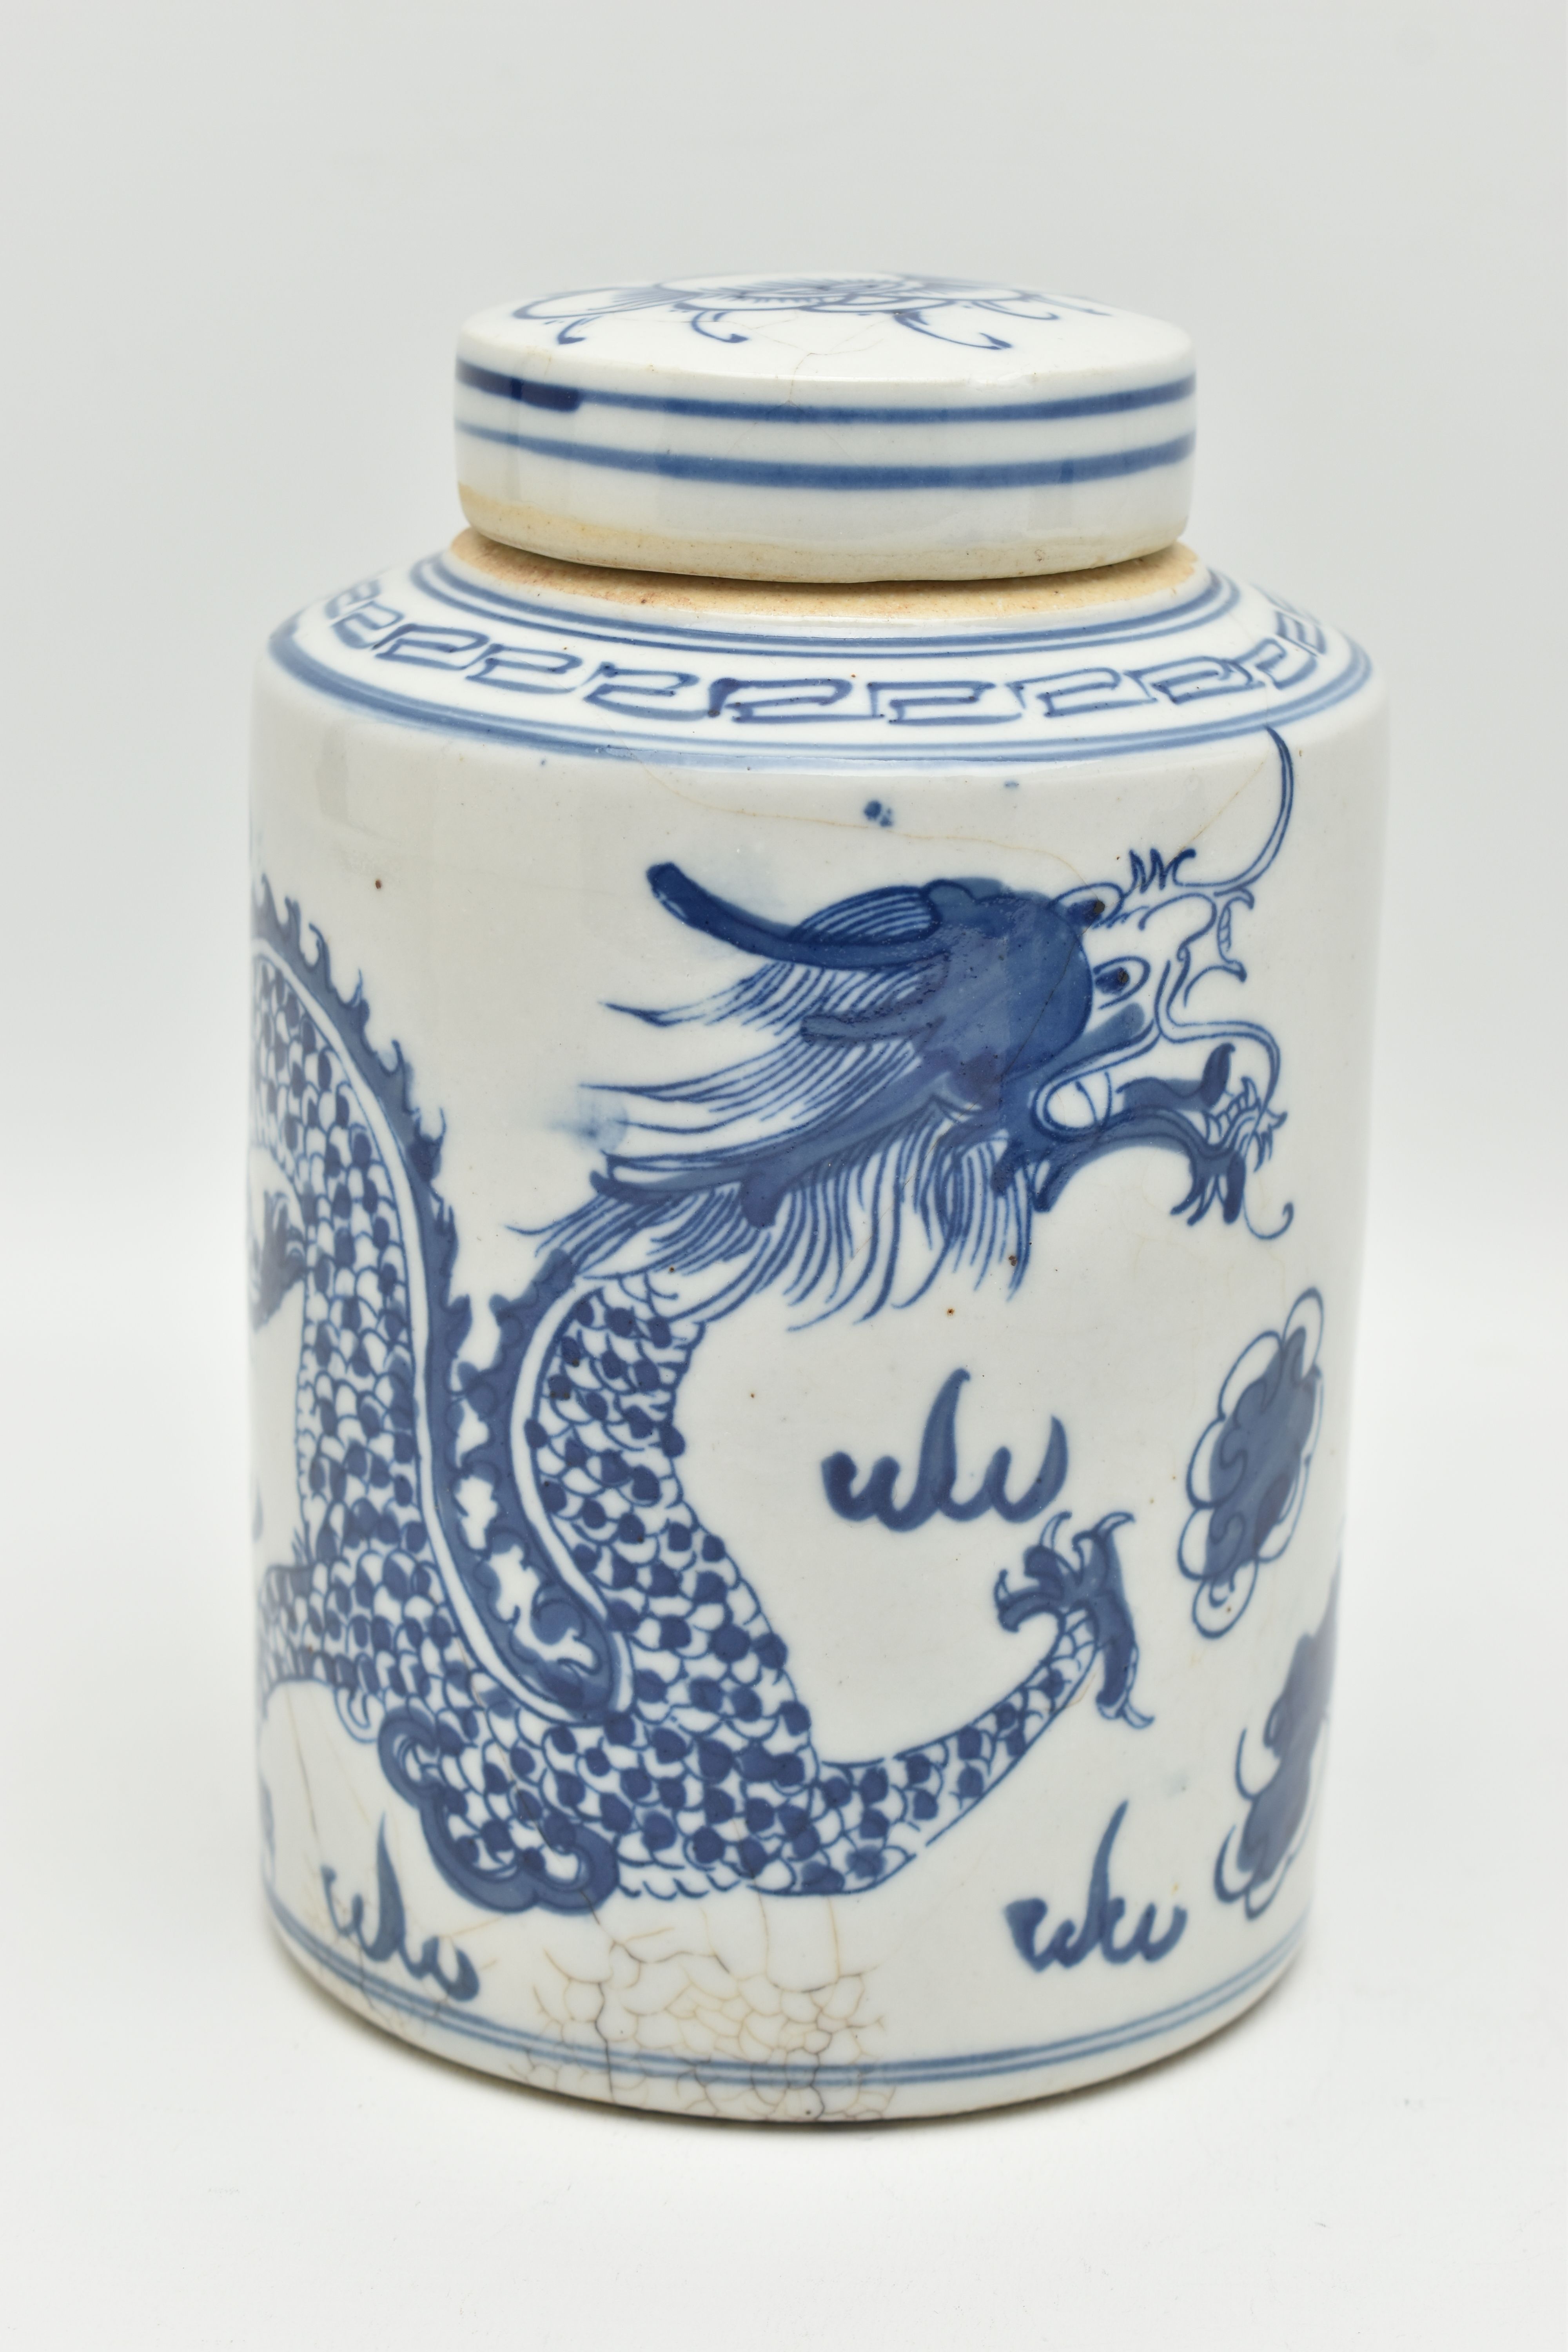 A 19TH CENTURY CHINESE PORCELAIN CYLINDRICAL JAR AND COVER DECORATED IN BLUE AND WHITE WITH A FOUR